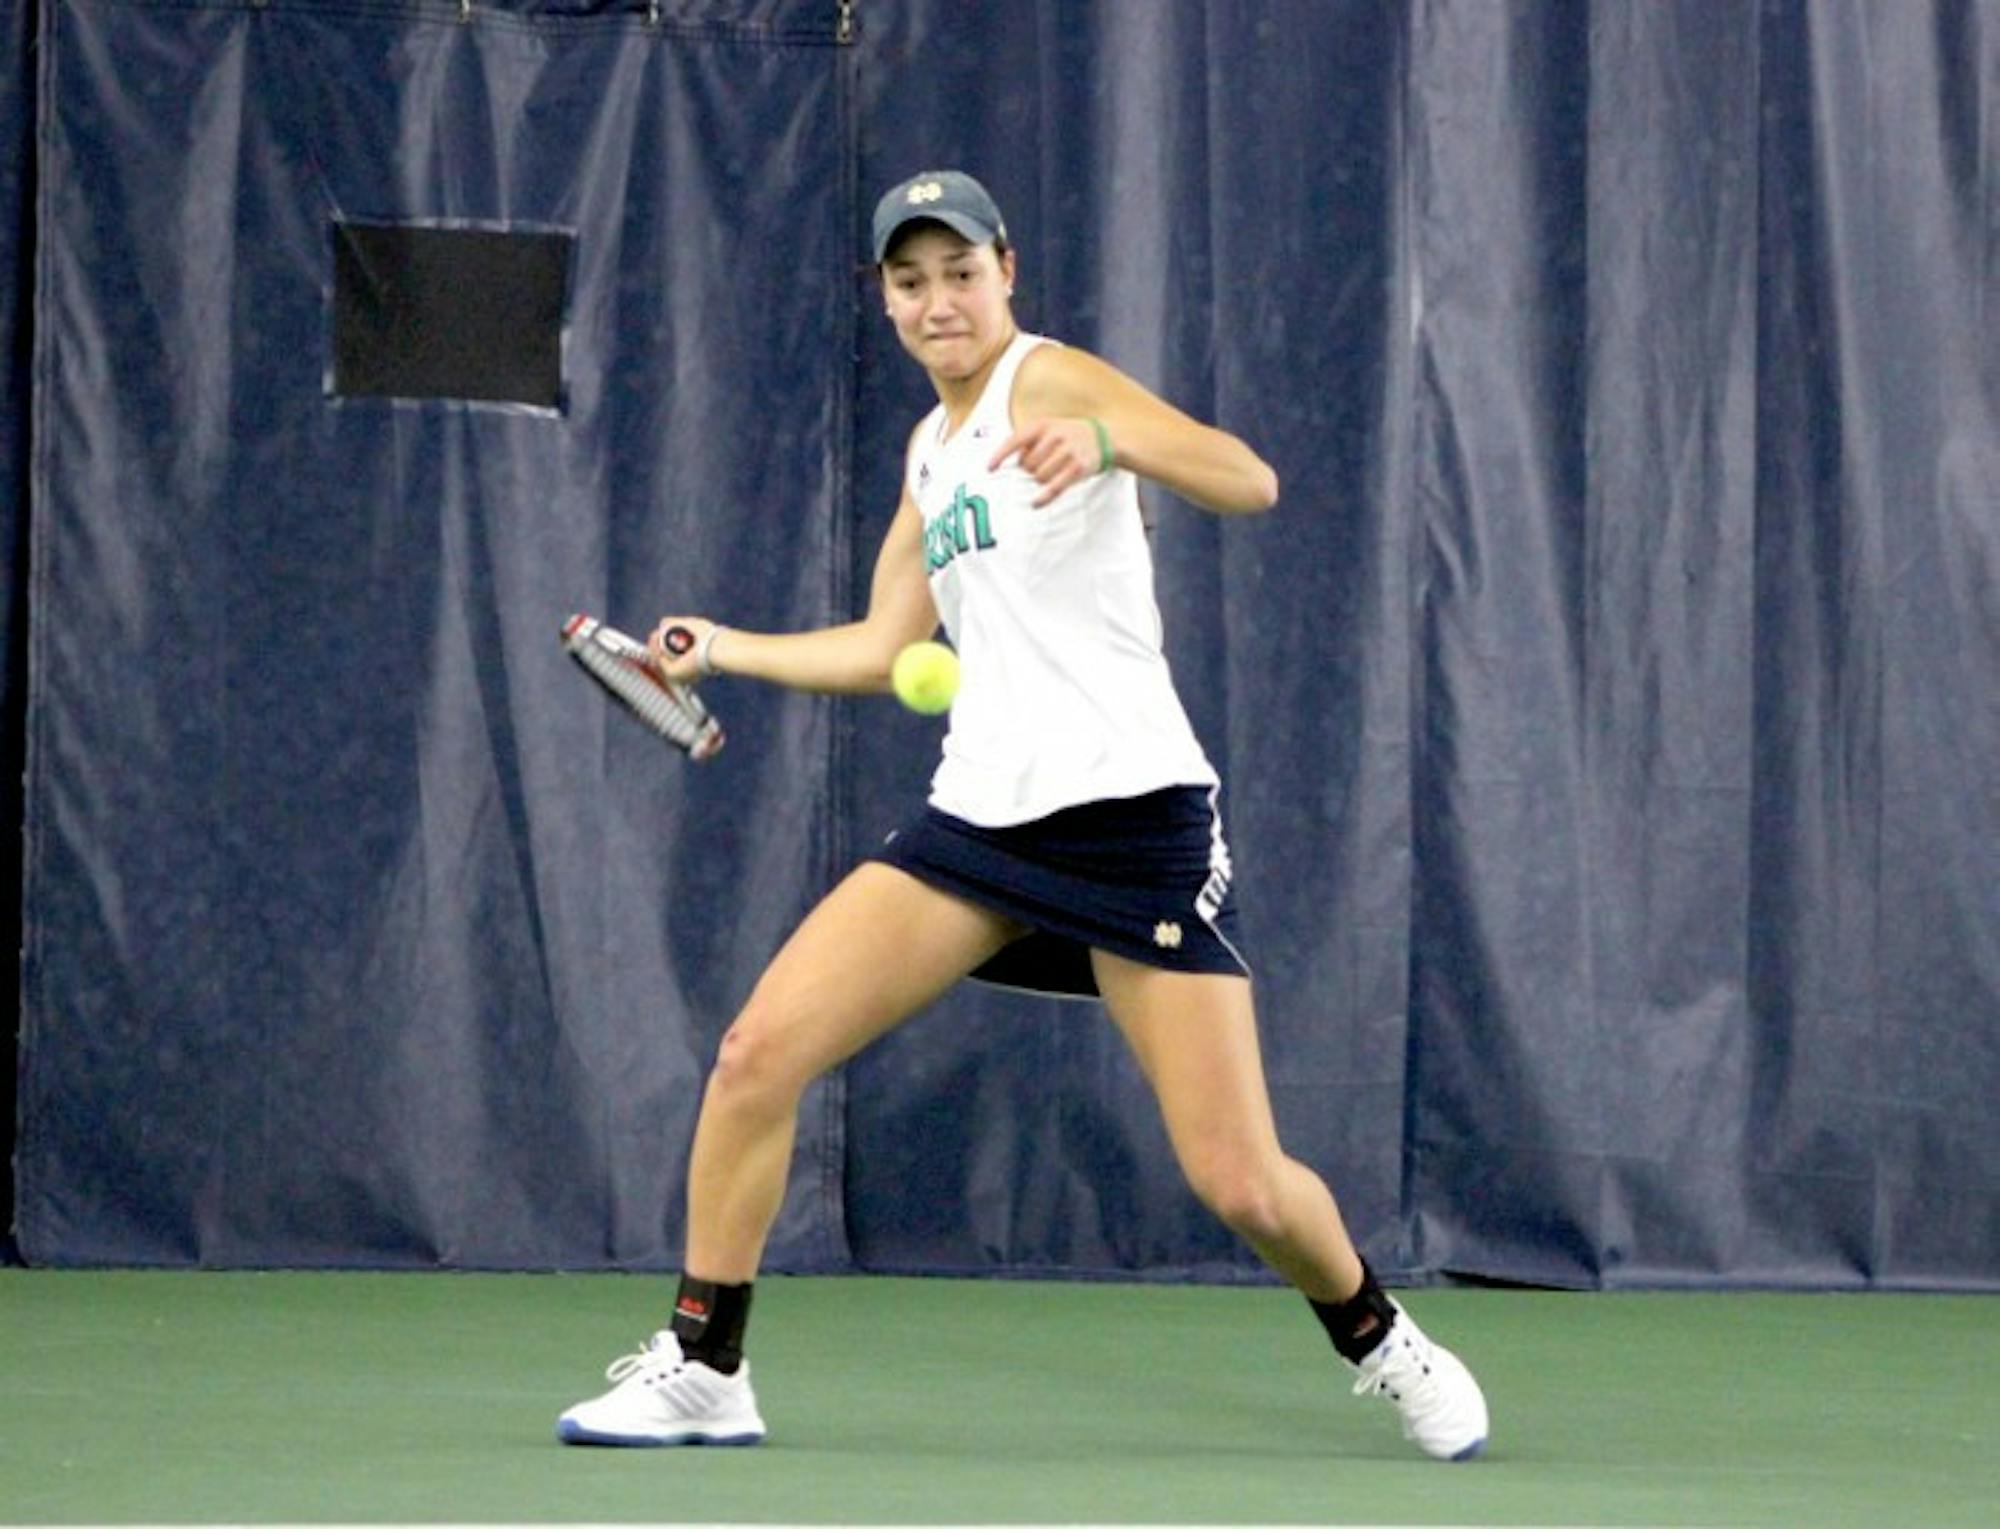 Irish sophomore Quinn Gleason hits a ball during Notre Dame’s 4-3 victory over Indiana in the Eck Tennis Pavilion on Feb. 2. Gleason won both her singles match and doubles match Friday against Duke.